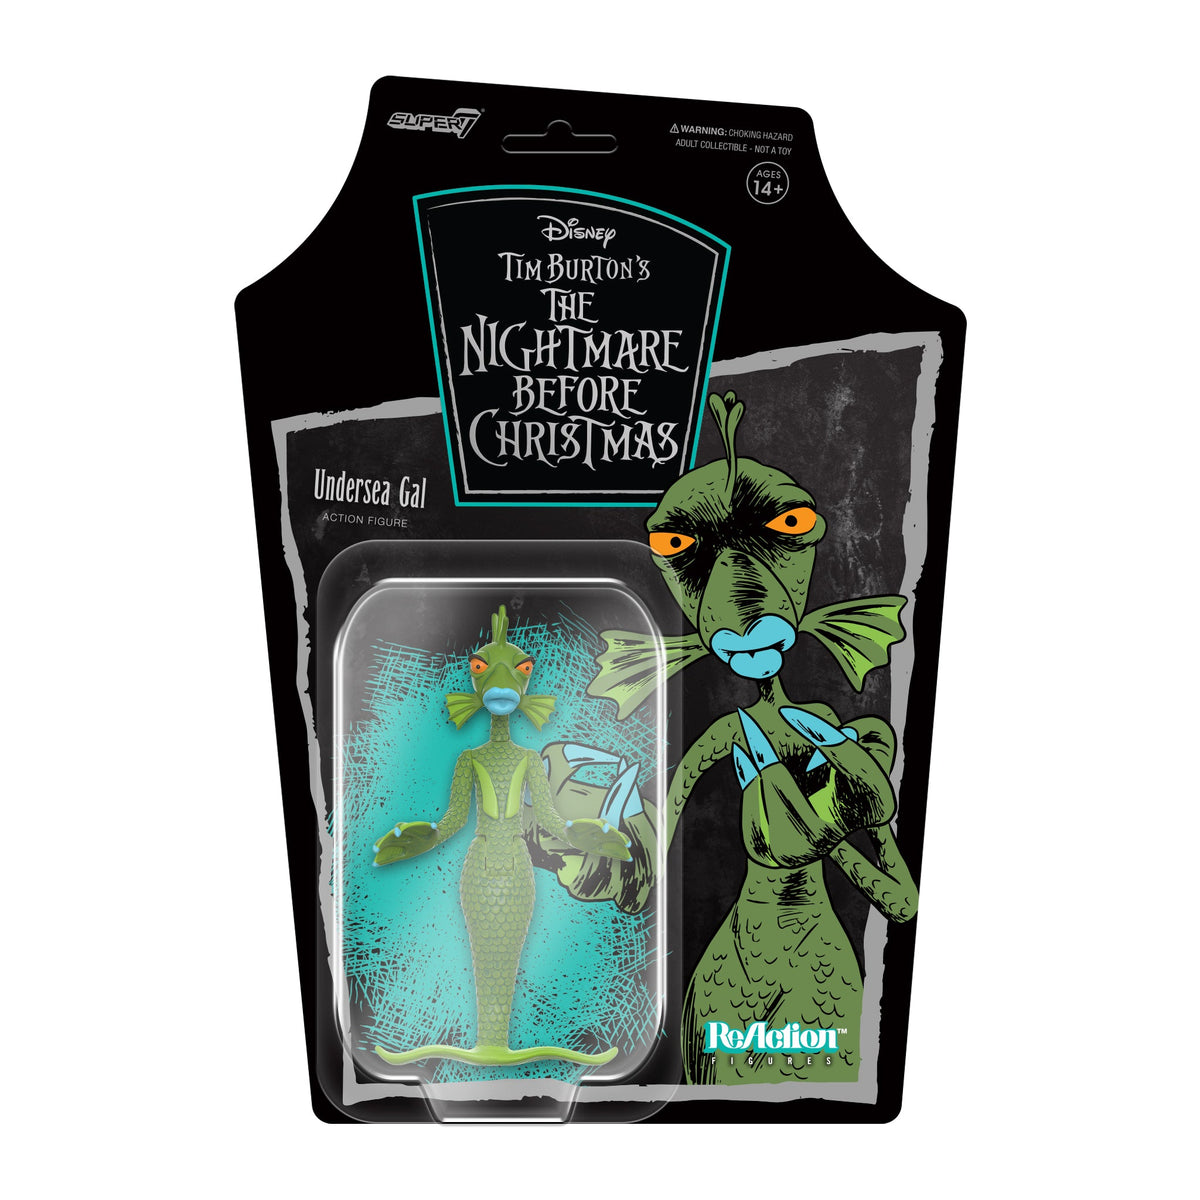 The Nightmare Before Christmas: 3.75" Undersea Gal ReAction Collectible Action Figure